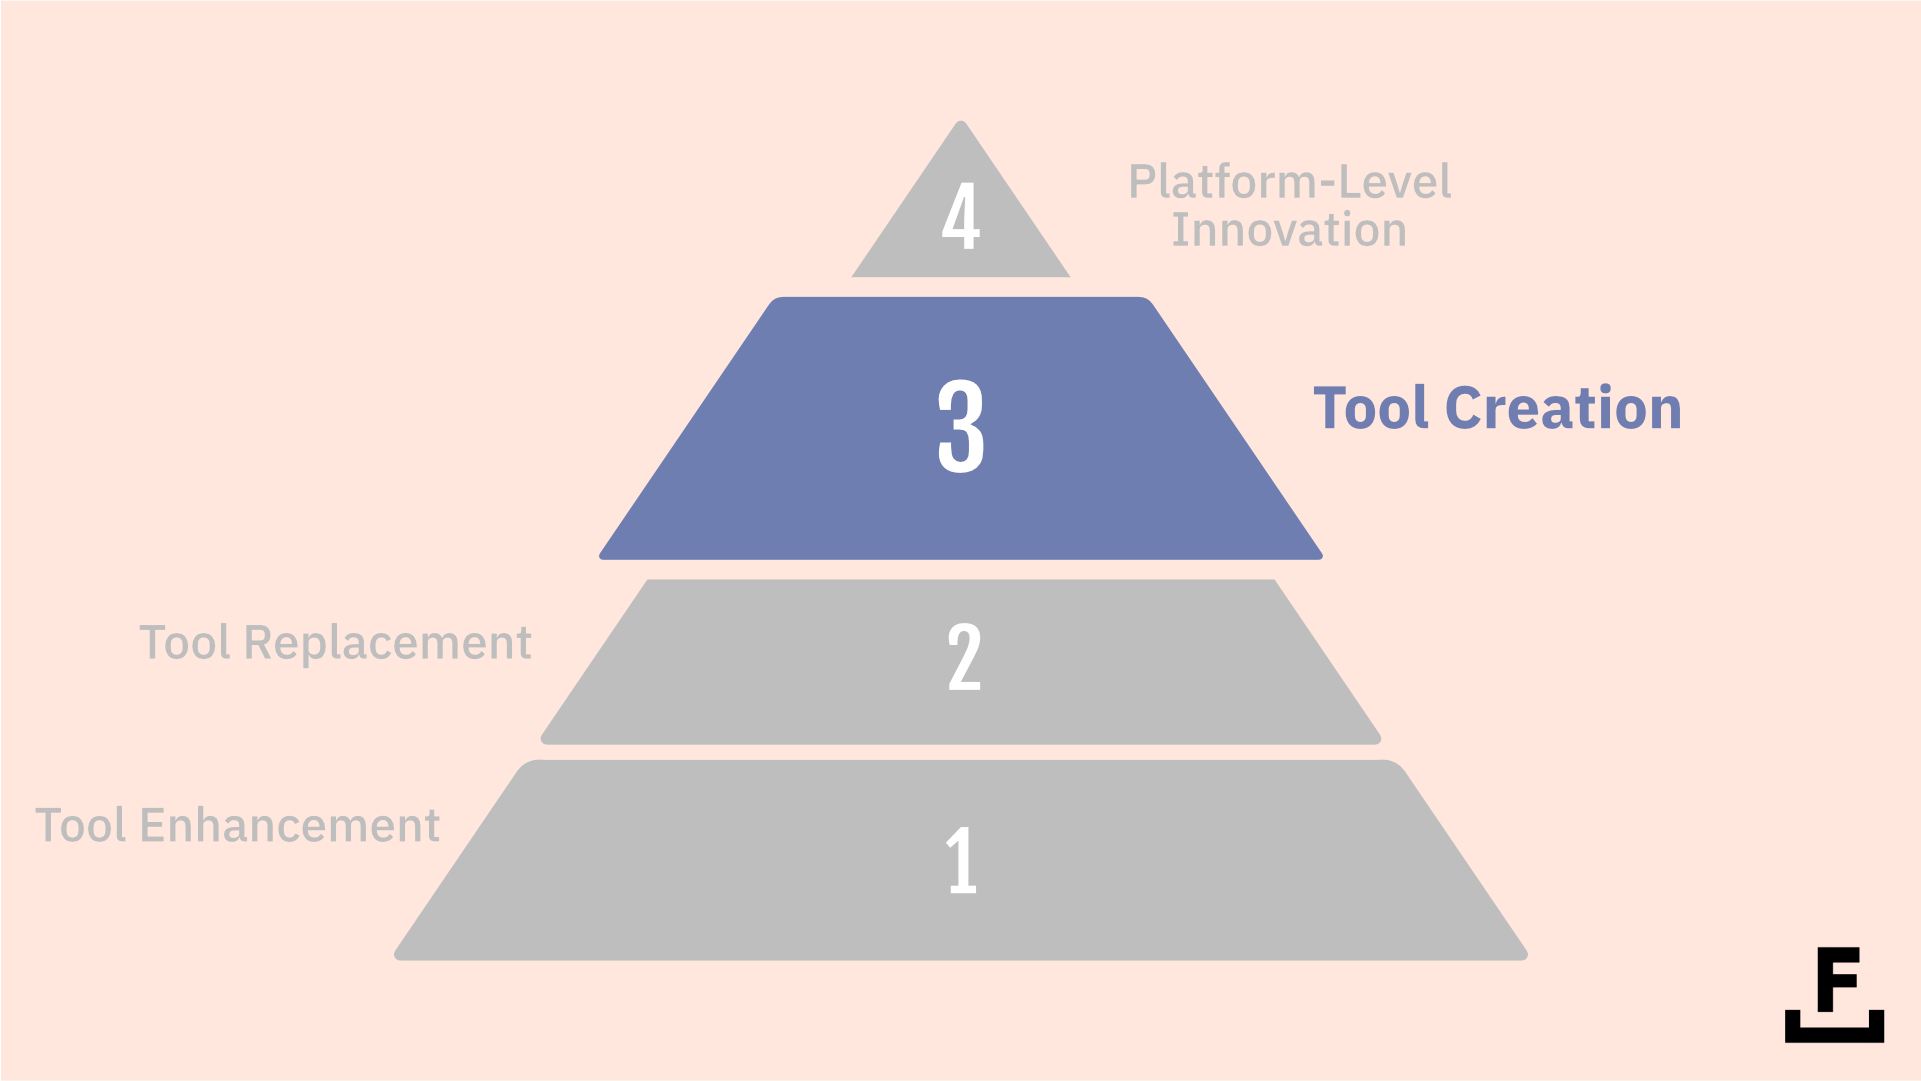 A pyramid of types of AI tools, highlighting the “Tool Creation” level.